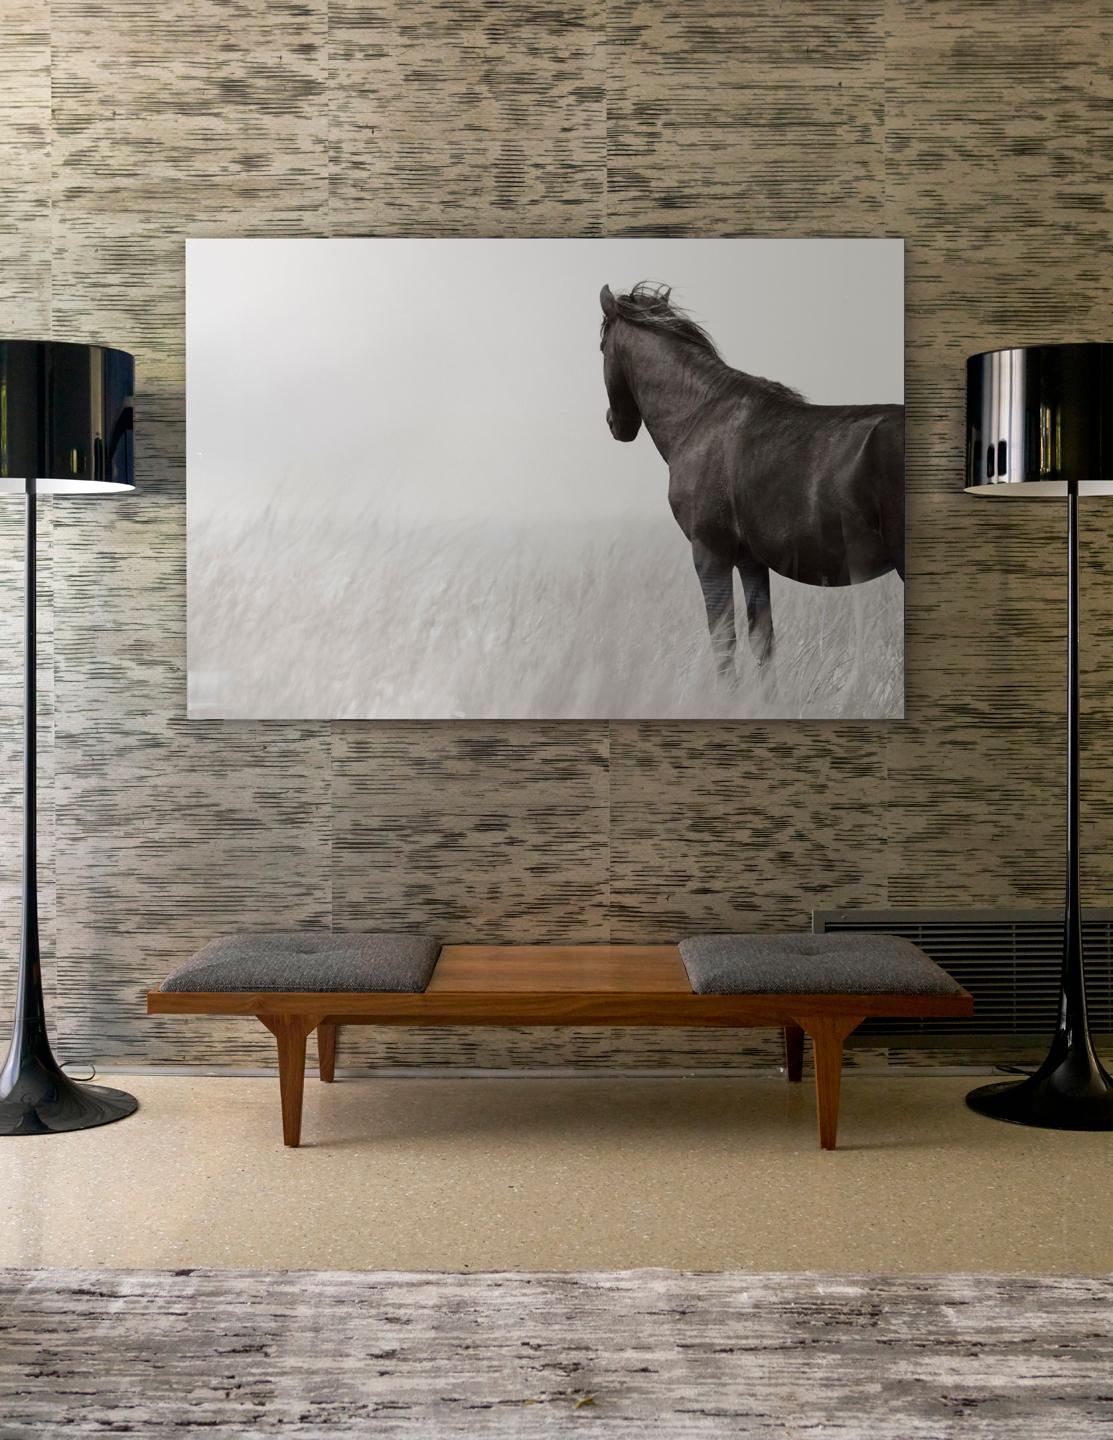 Fashion, Equestrian, Single Sable Island Horse Against White Background - Photograph by Drew Doggett